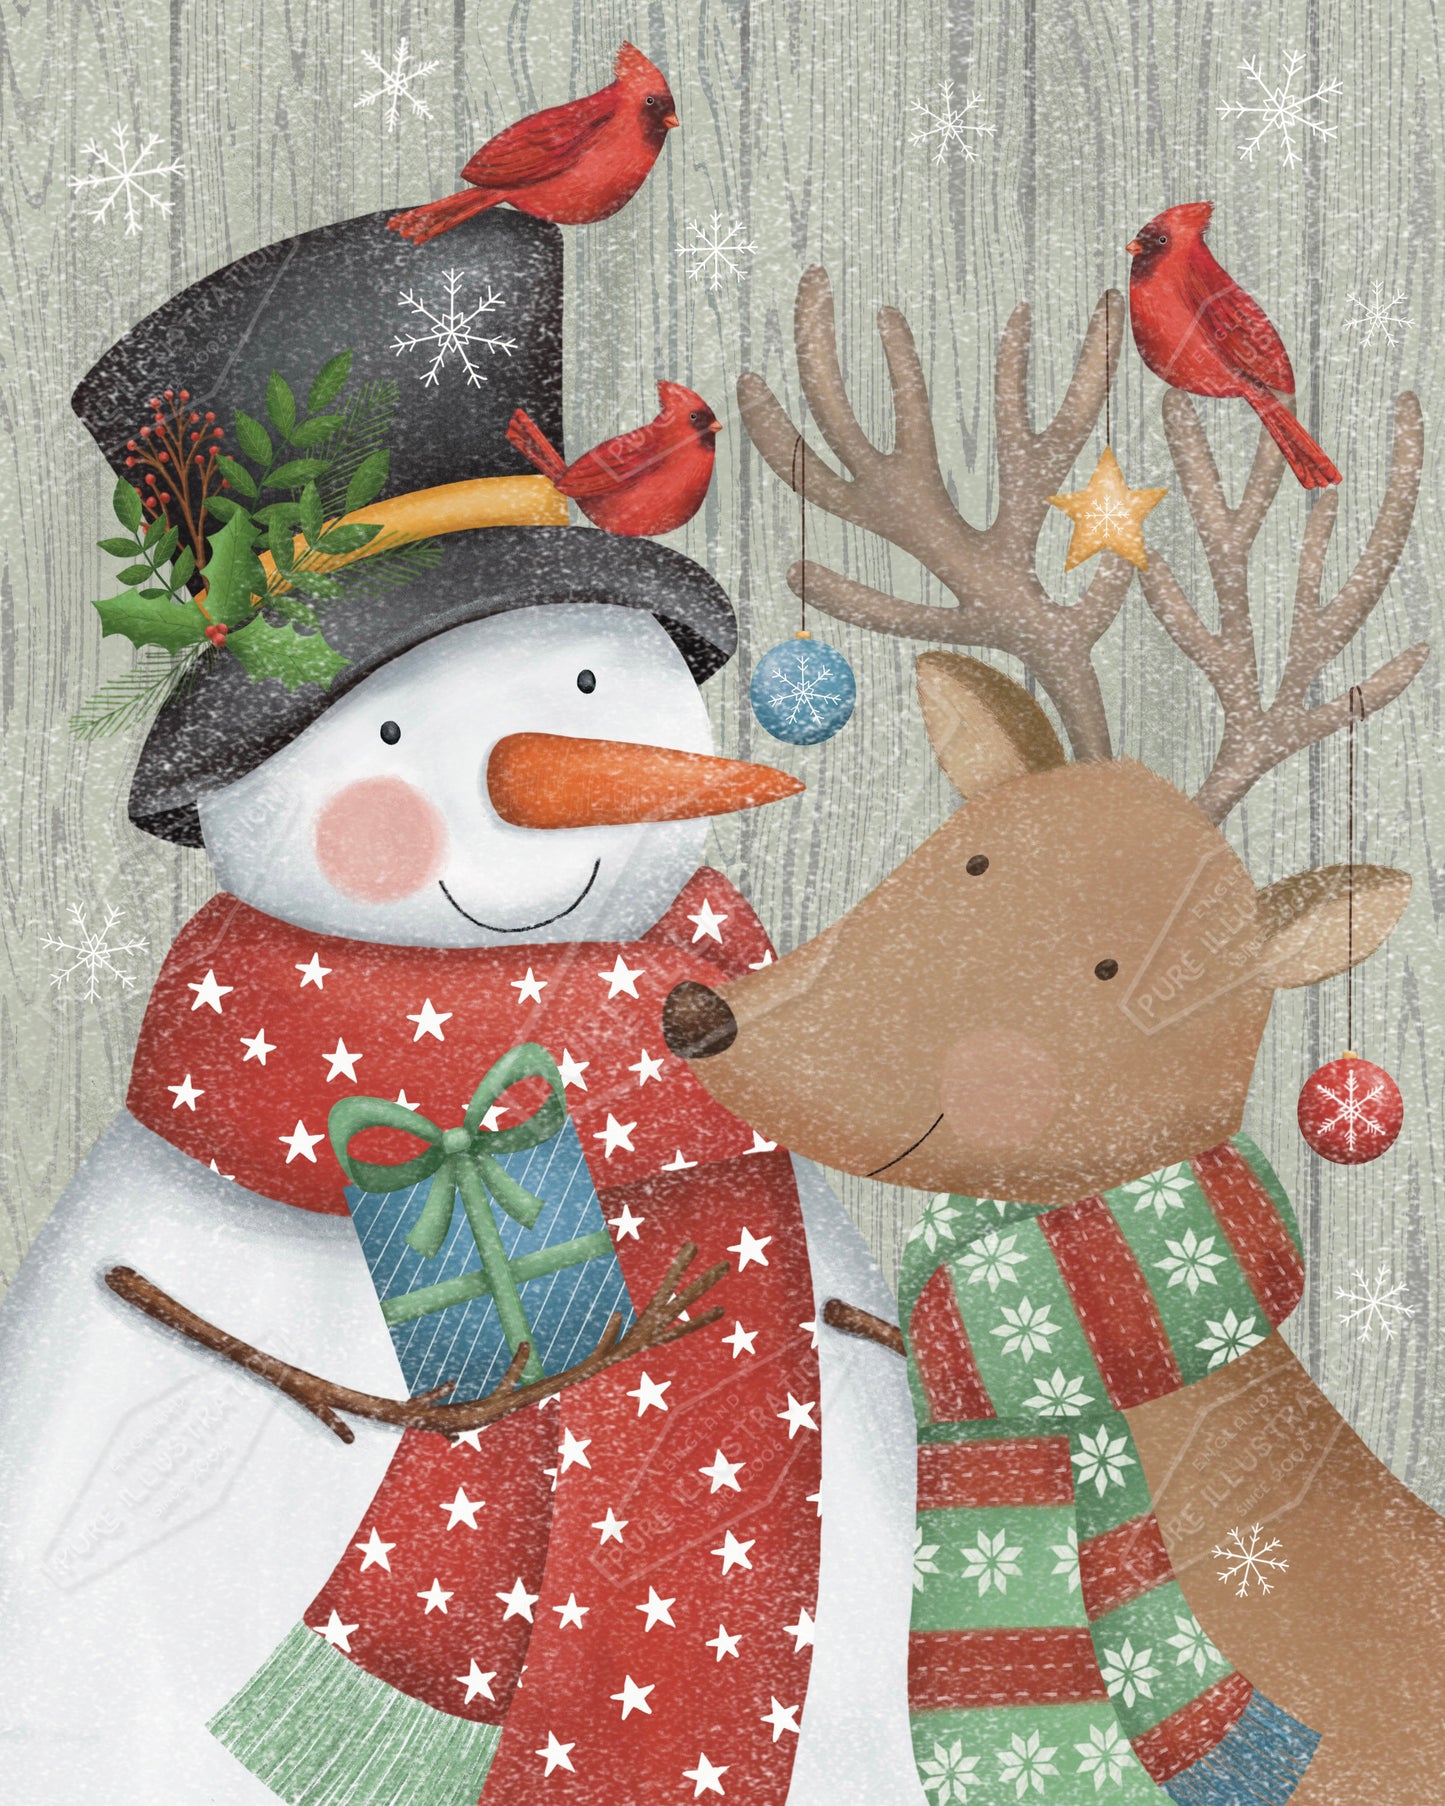 00035620AAI - Anna Aitken is represented by Pure Art Licensing Agency - Christmas Greeting Card Design